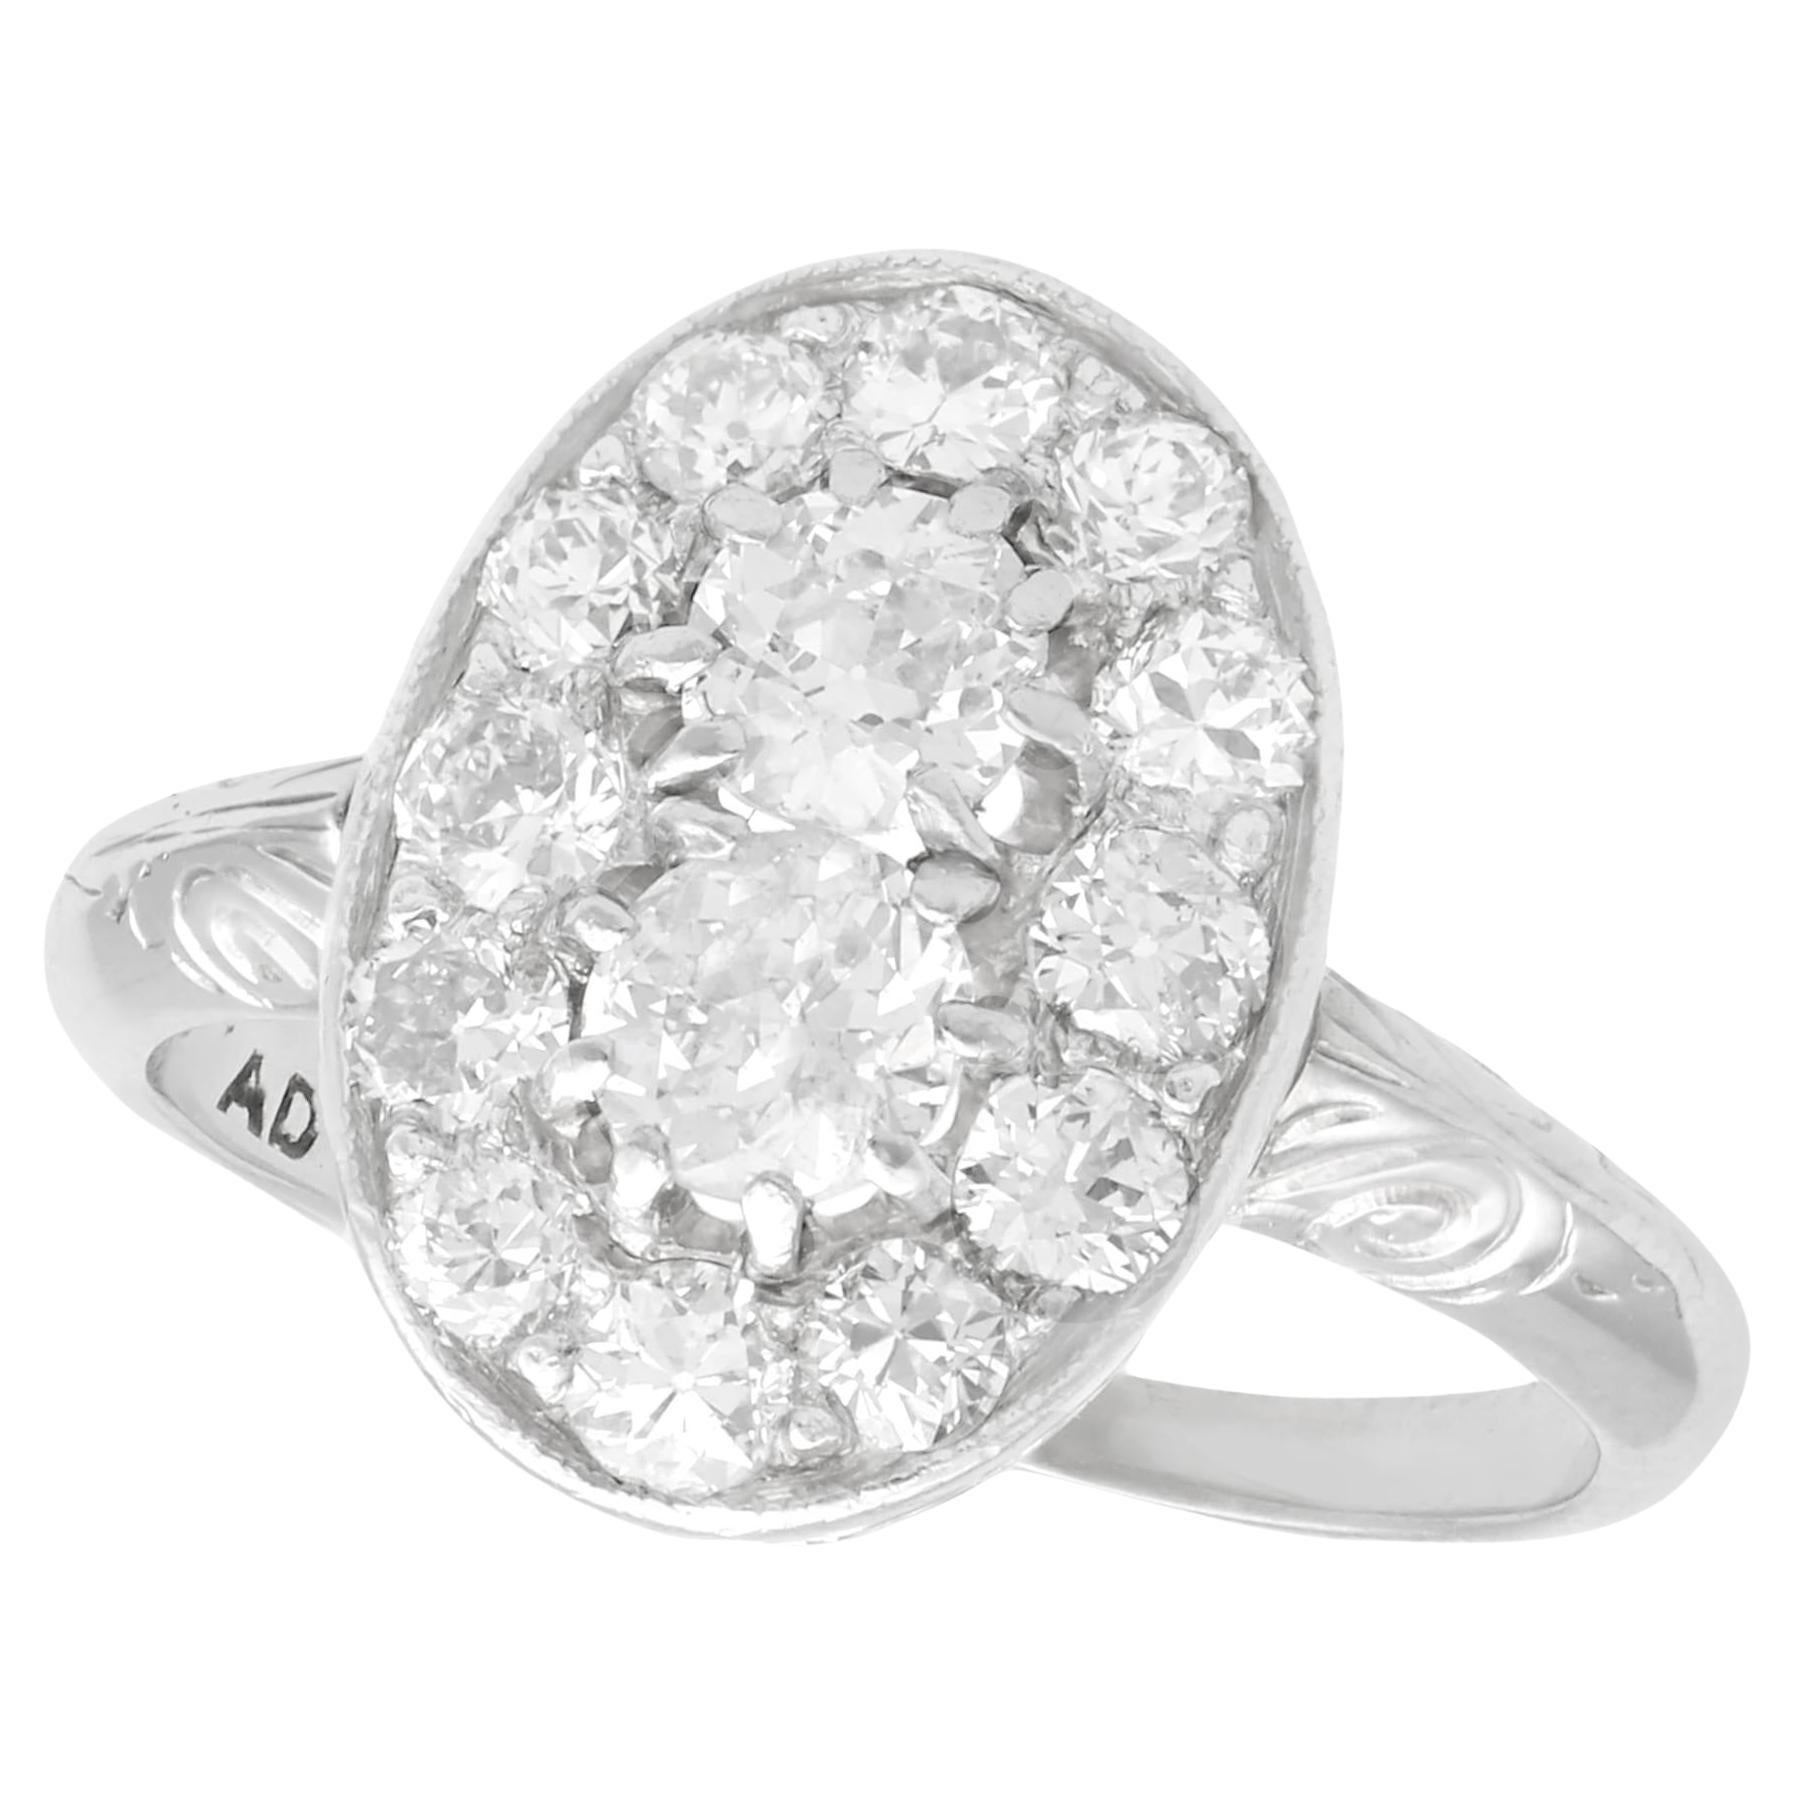 1940s 1.26 Carat Diamond and White Gold Platinum Set Cocktail Ring For Sale